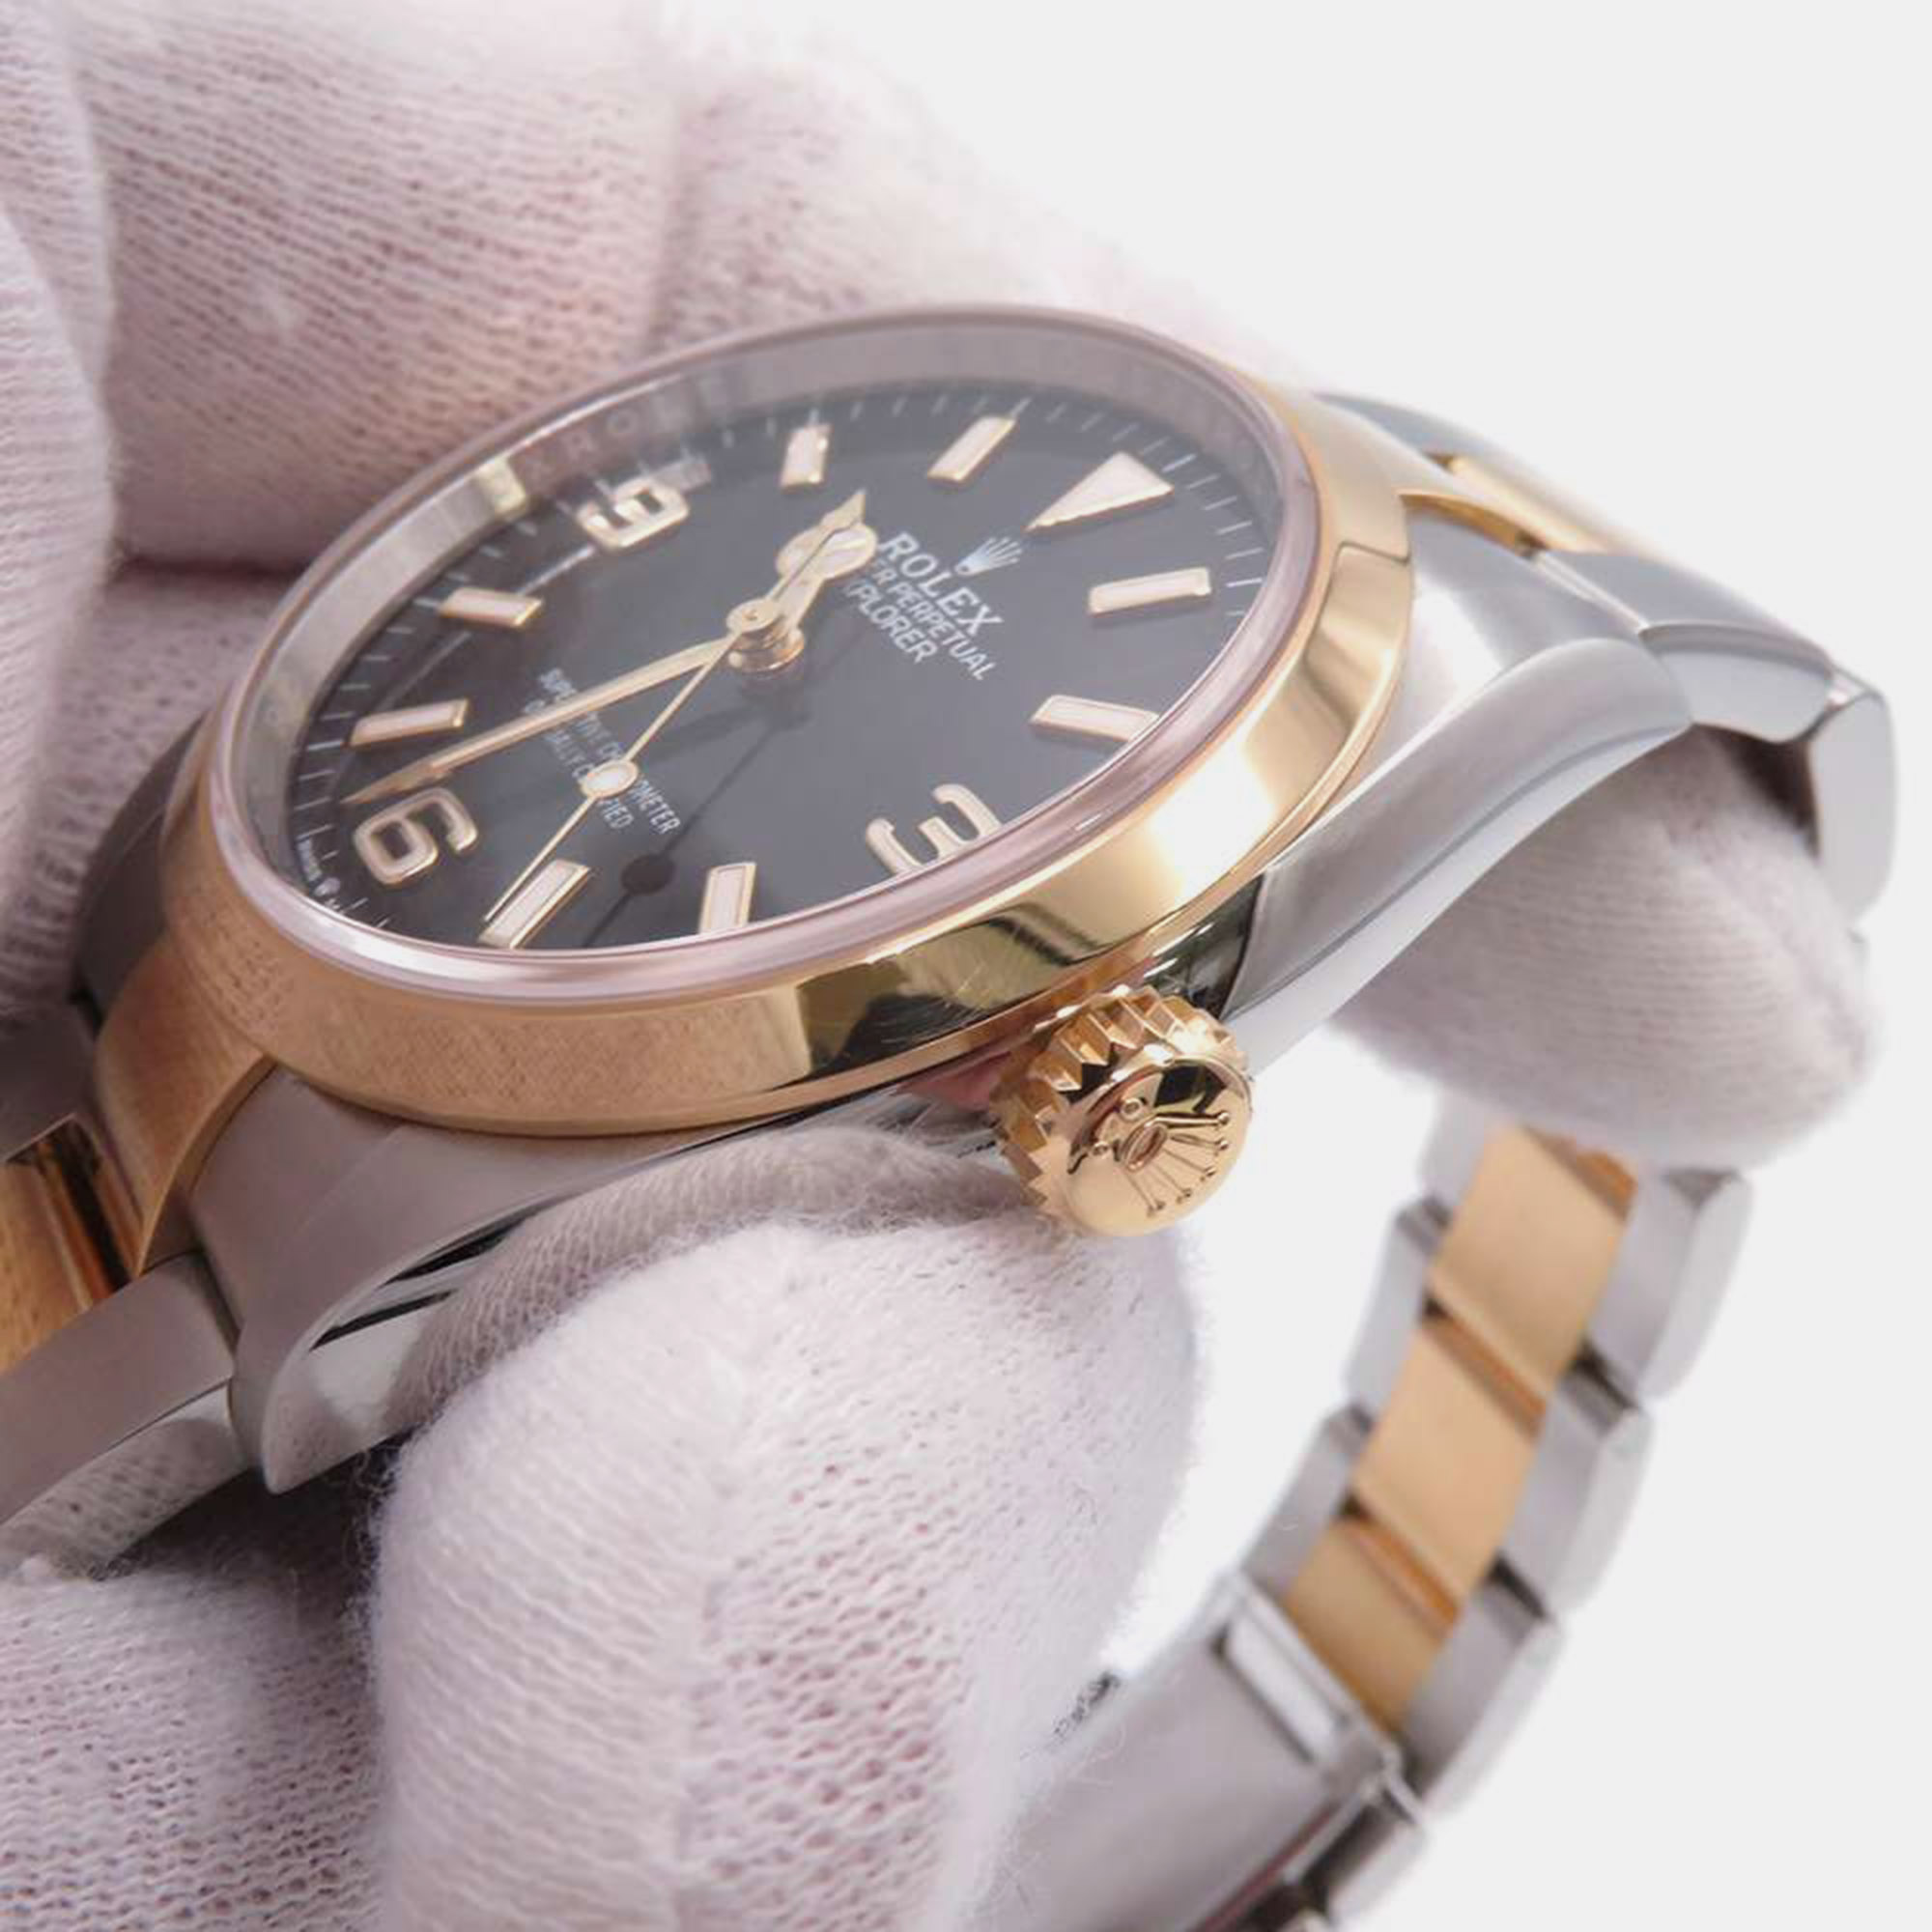 Rolex Black 18k Yellow Gold And Stainless Steel Explorer 124273 Automatic Men's Wristwatch 36 Mm